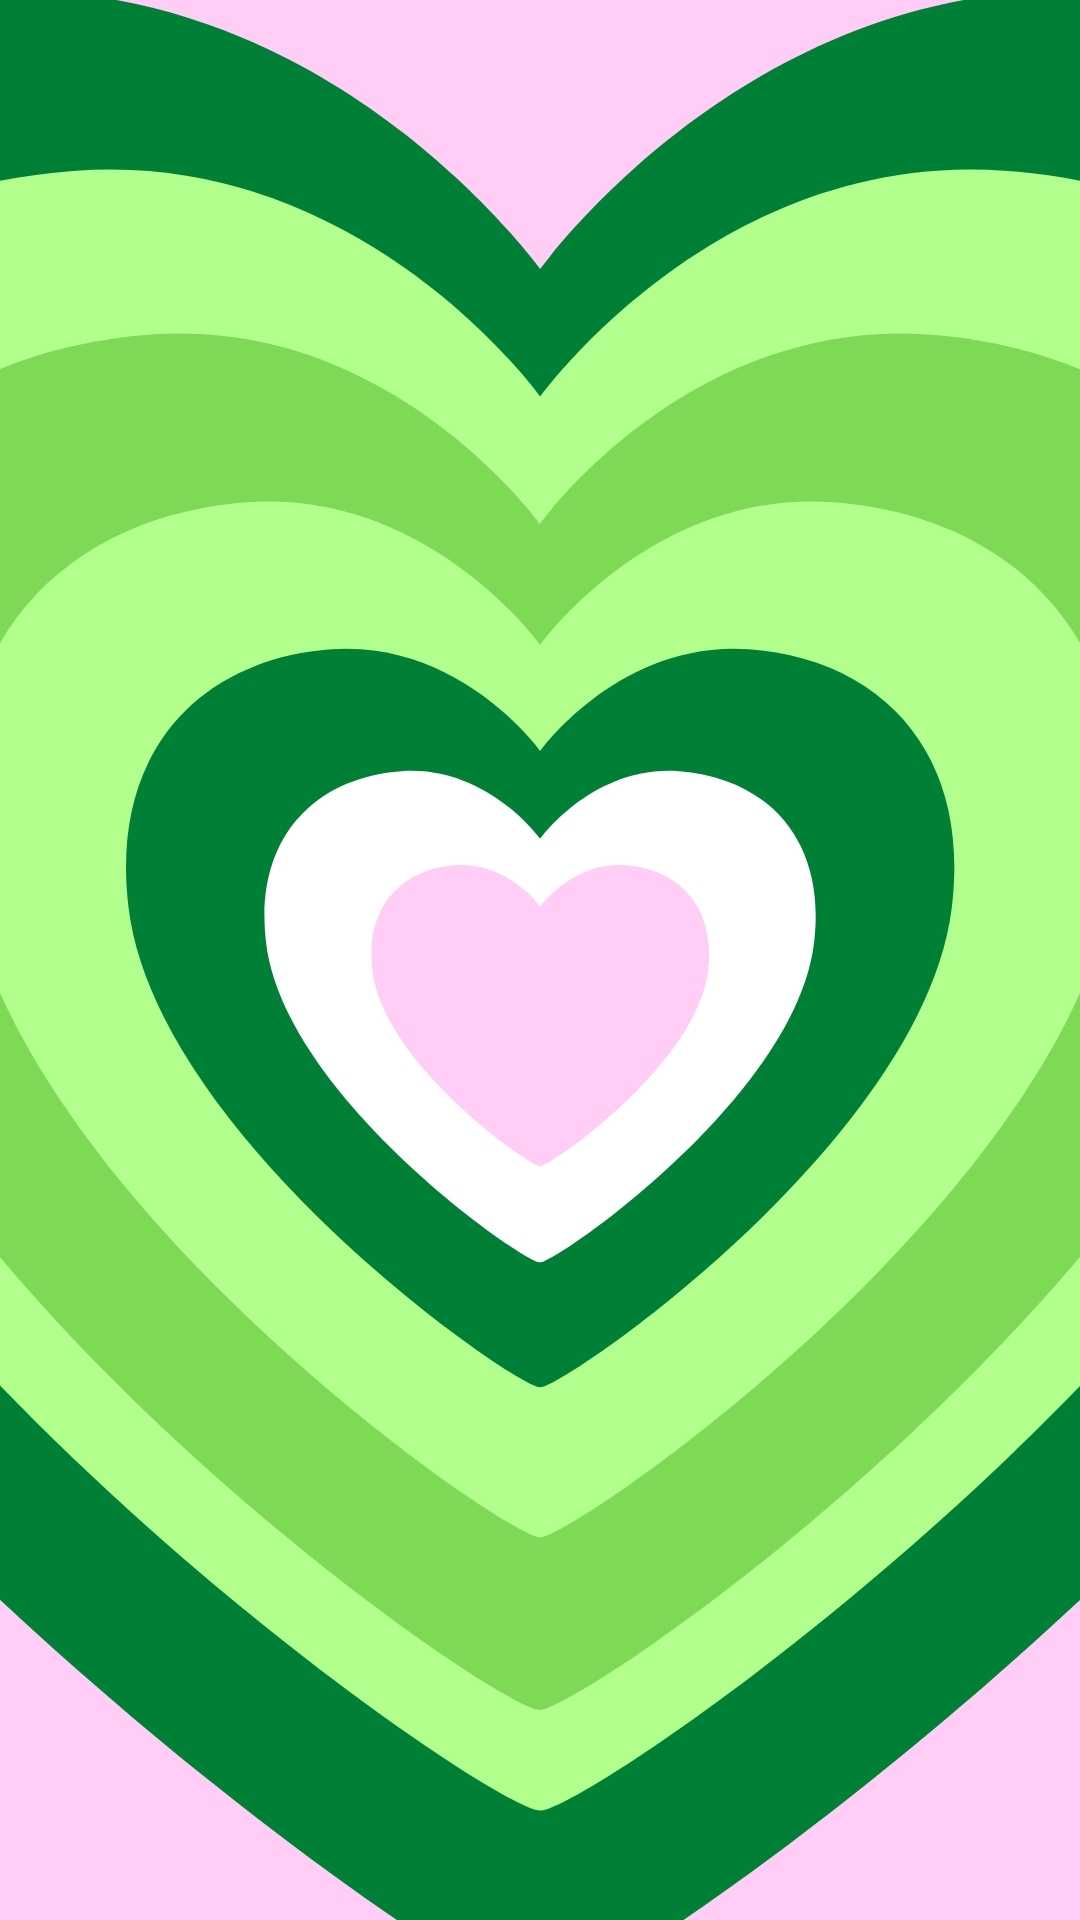 IPhone wallpaper with green hearts on a pink background - Pink heart